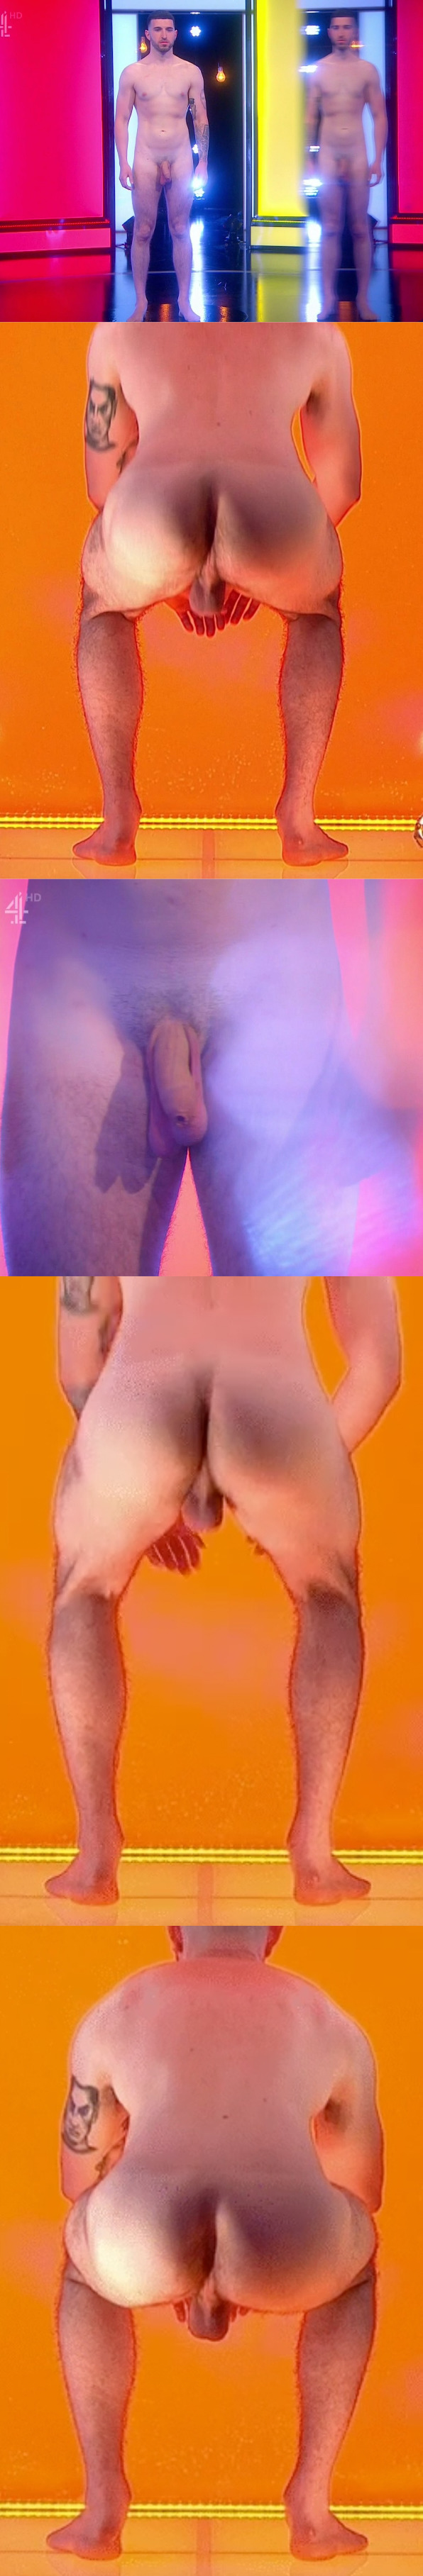 Straight guy Tony full frontal naked showing even his ass hole at Naked Attraction